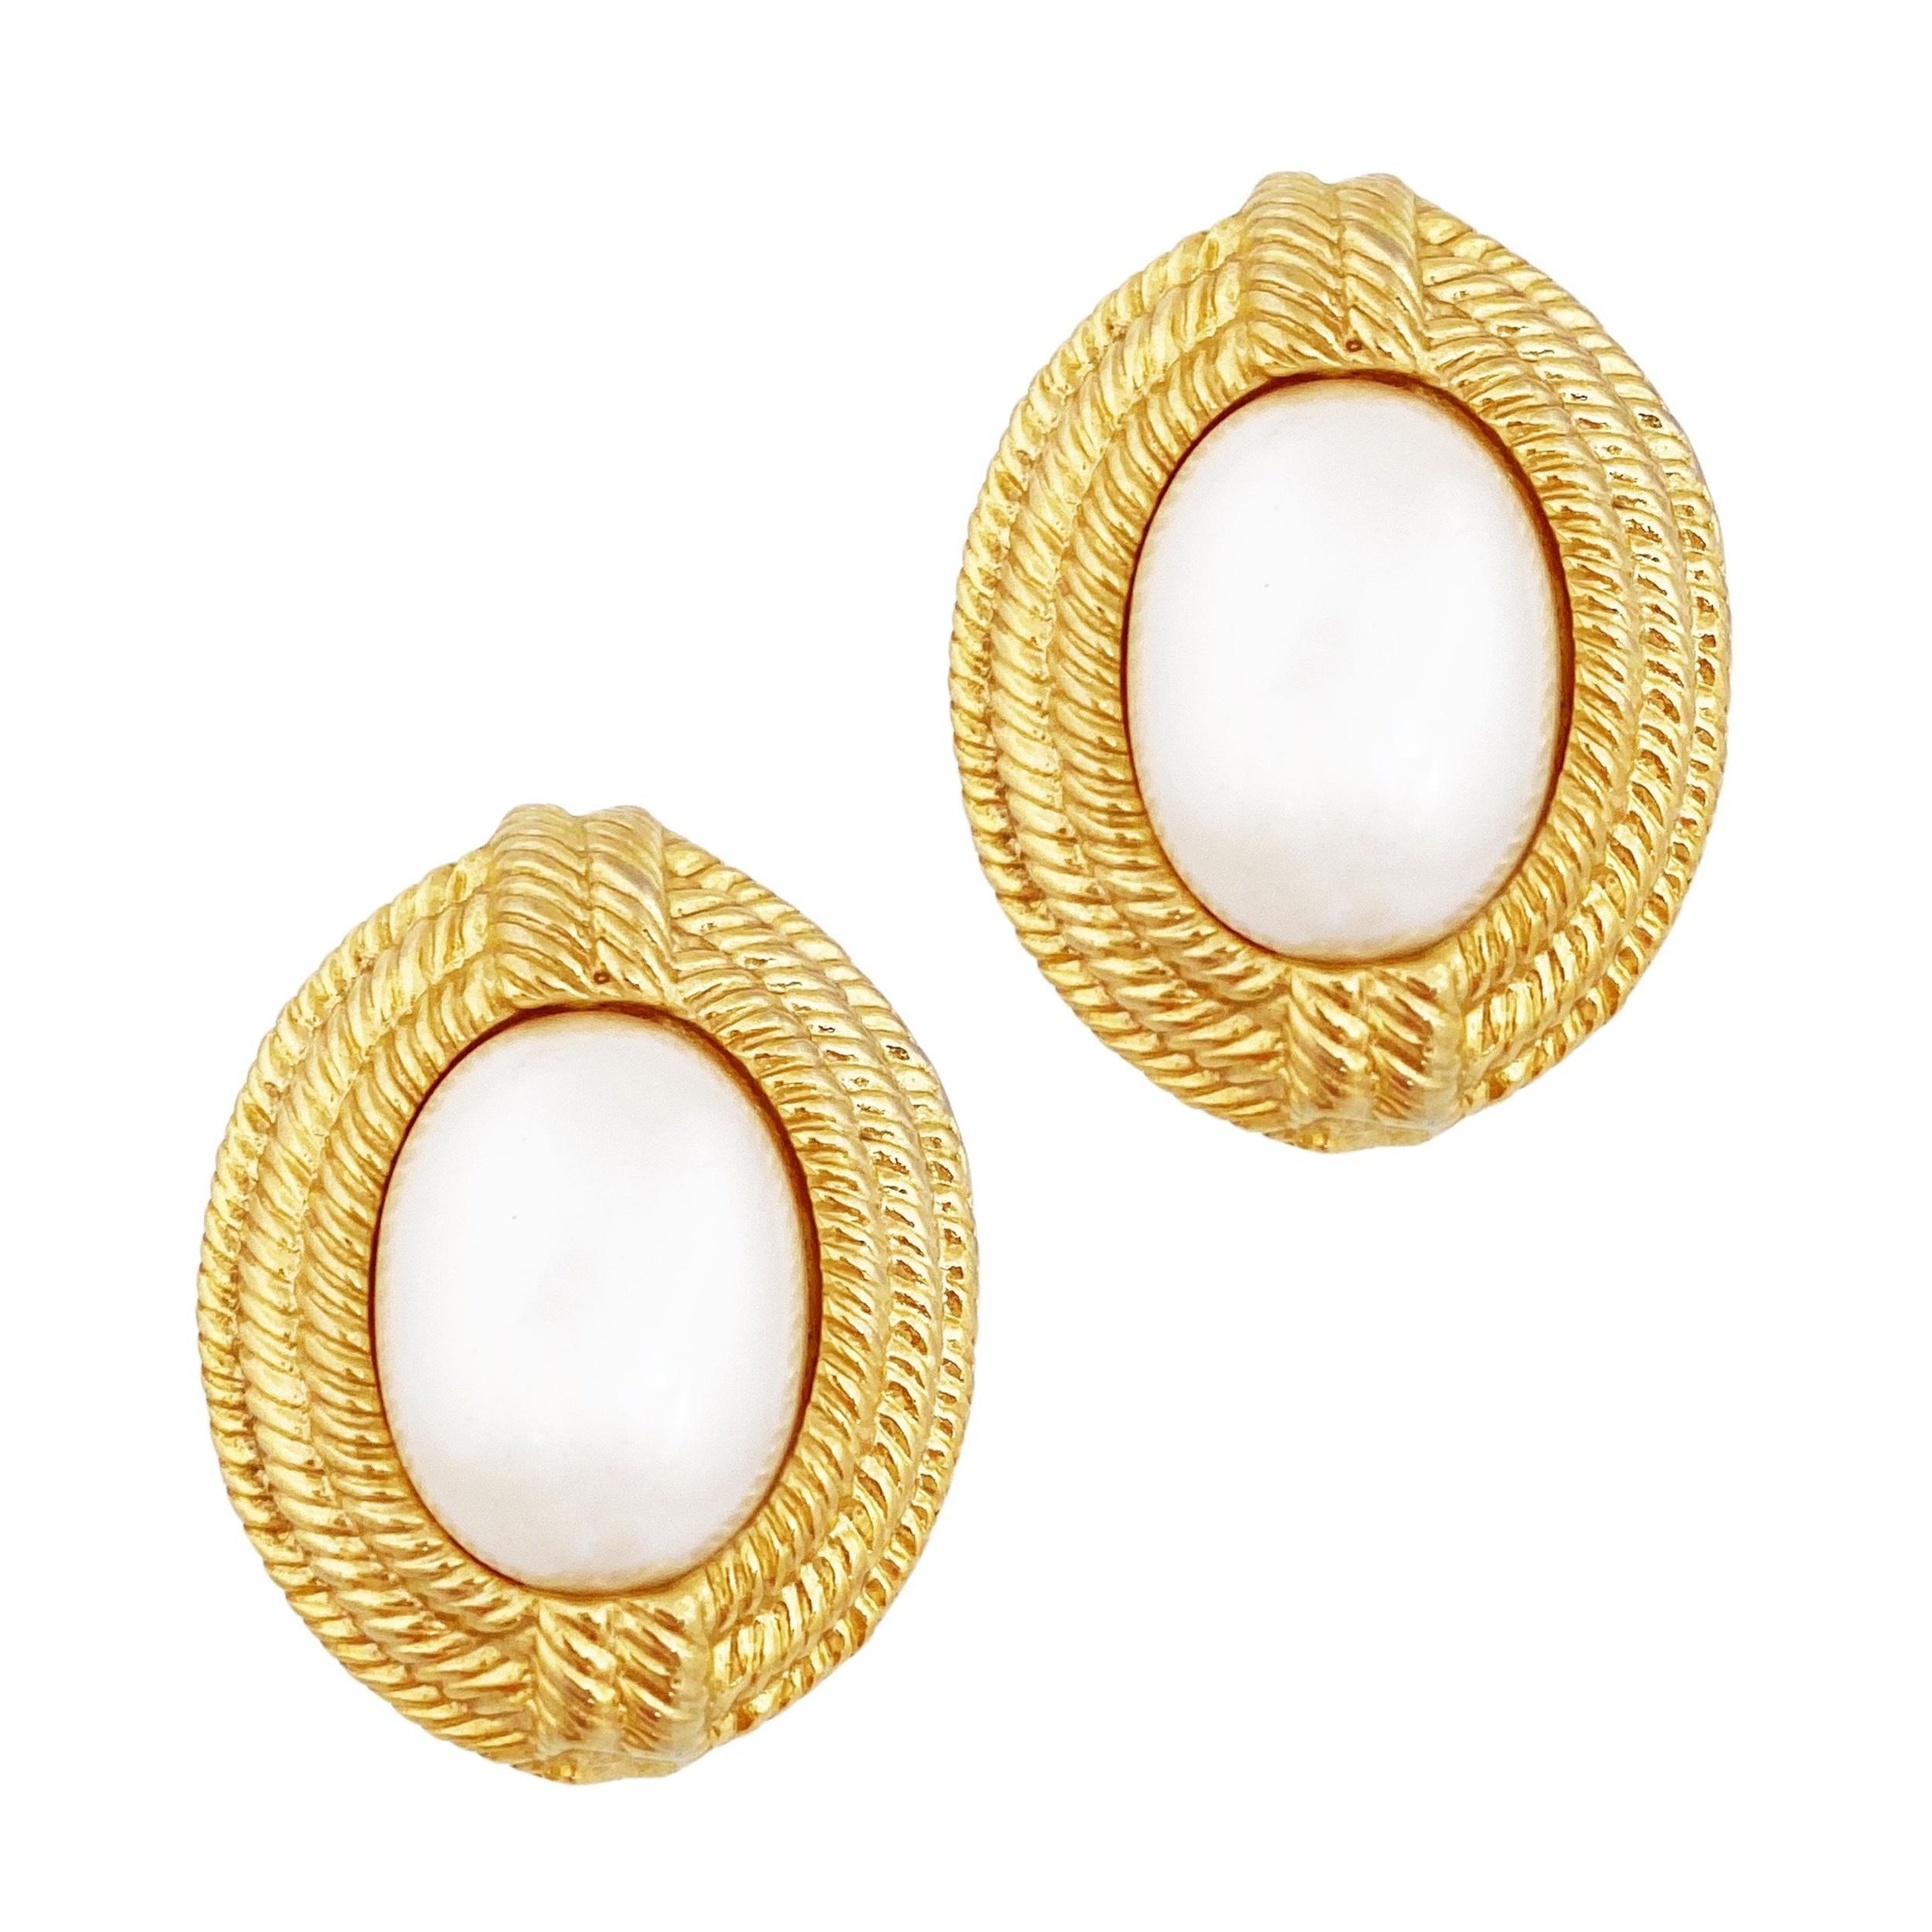 Gold Braid Texture Statement Earrings with Faux Pearls by Givenchy, 1980s